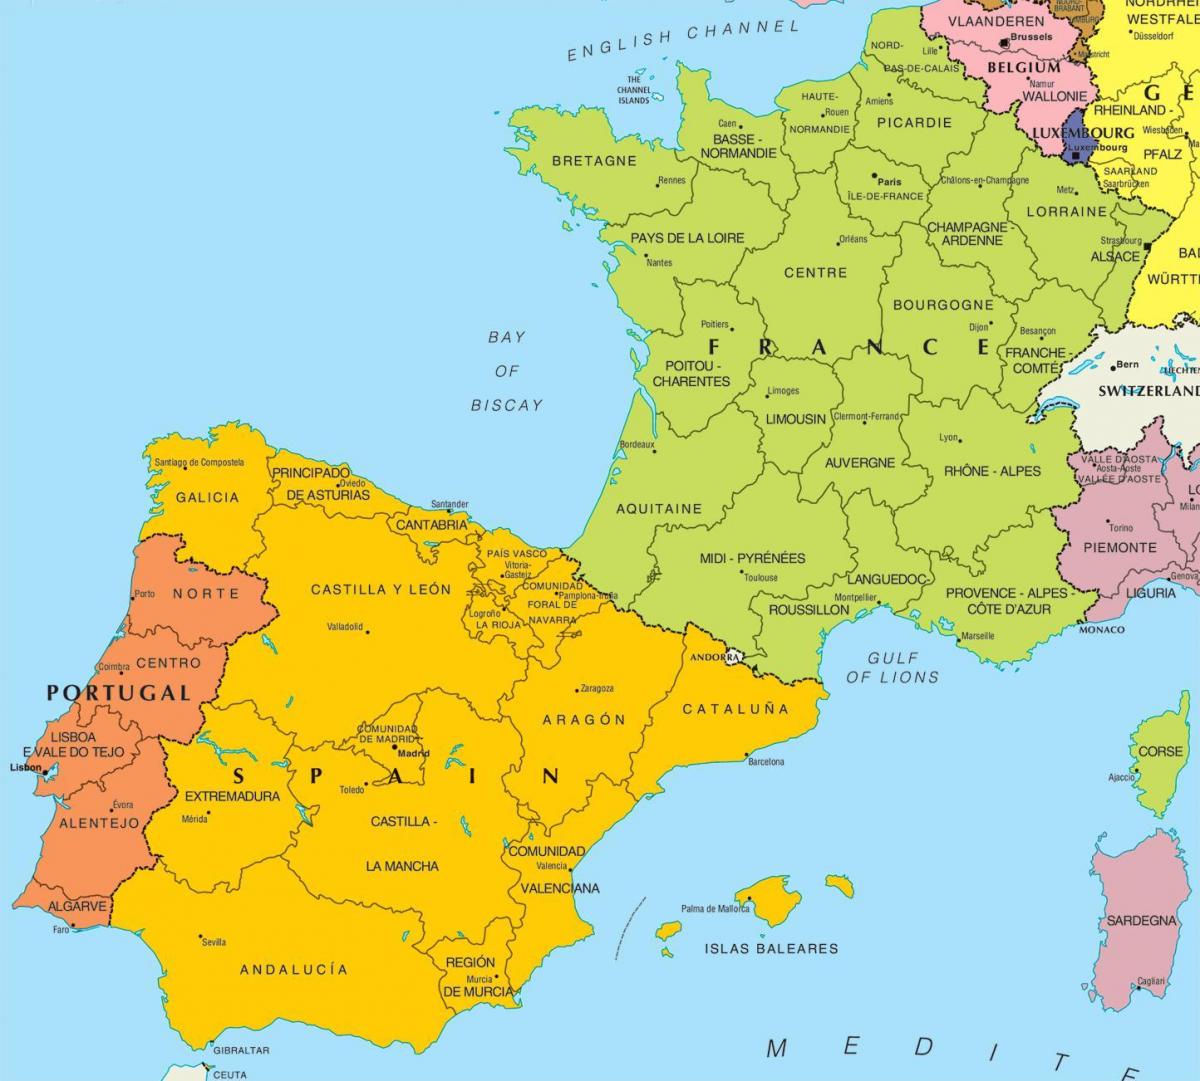 Map of Spain and bordering countries